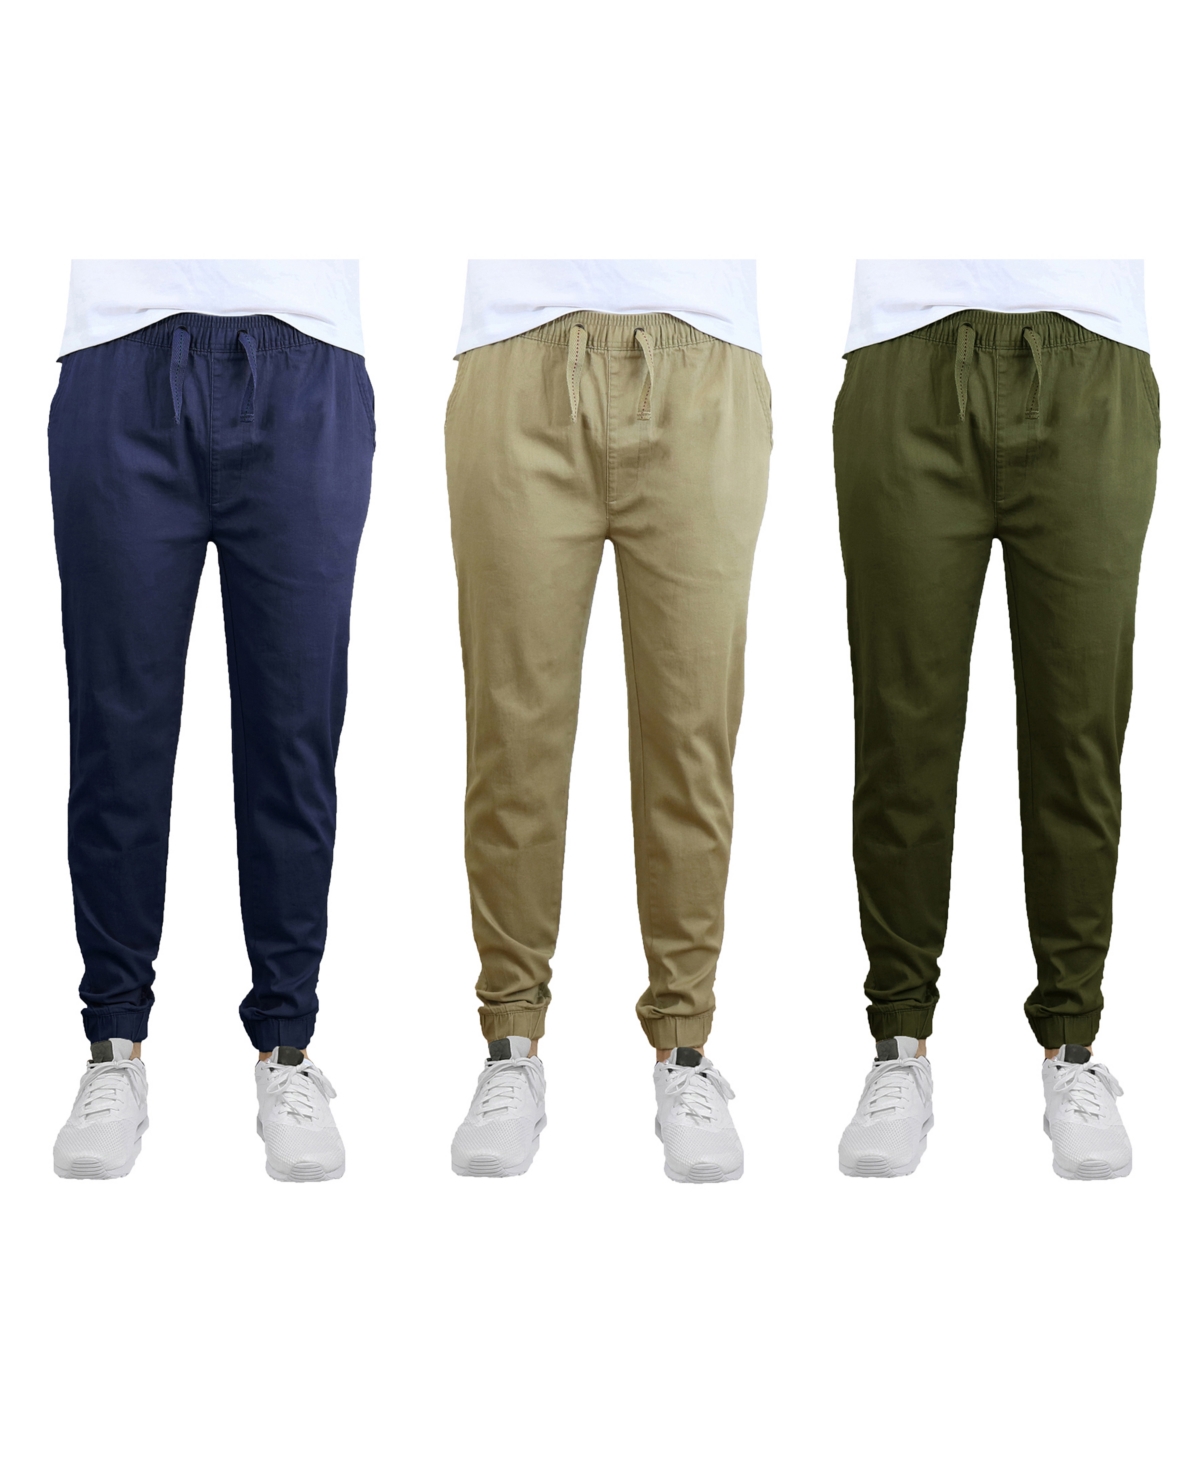 Shop Galaxy By Harvic Men's Slim Fit Basic Stretch Twill Joggers, Pack Of 3 In Navy,khaki And Olive